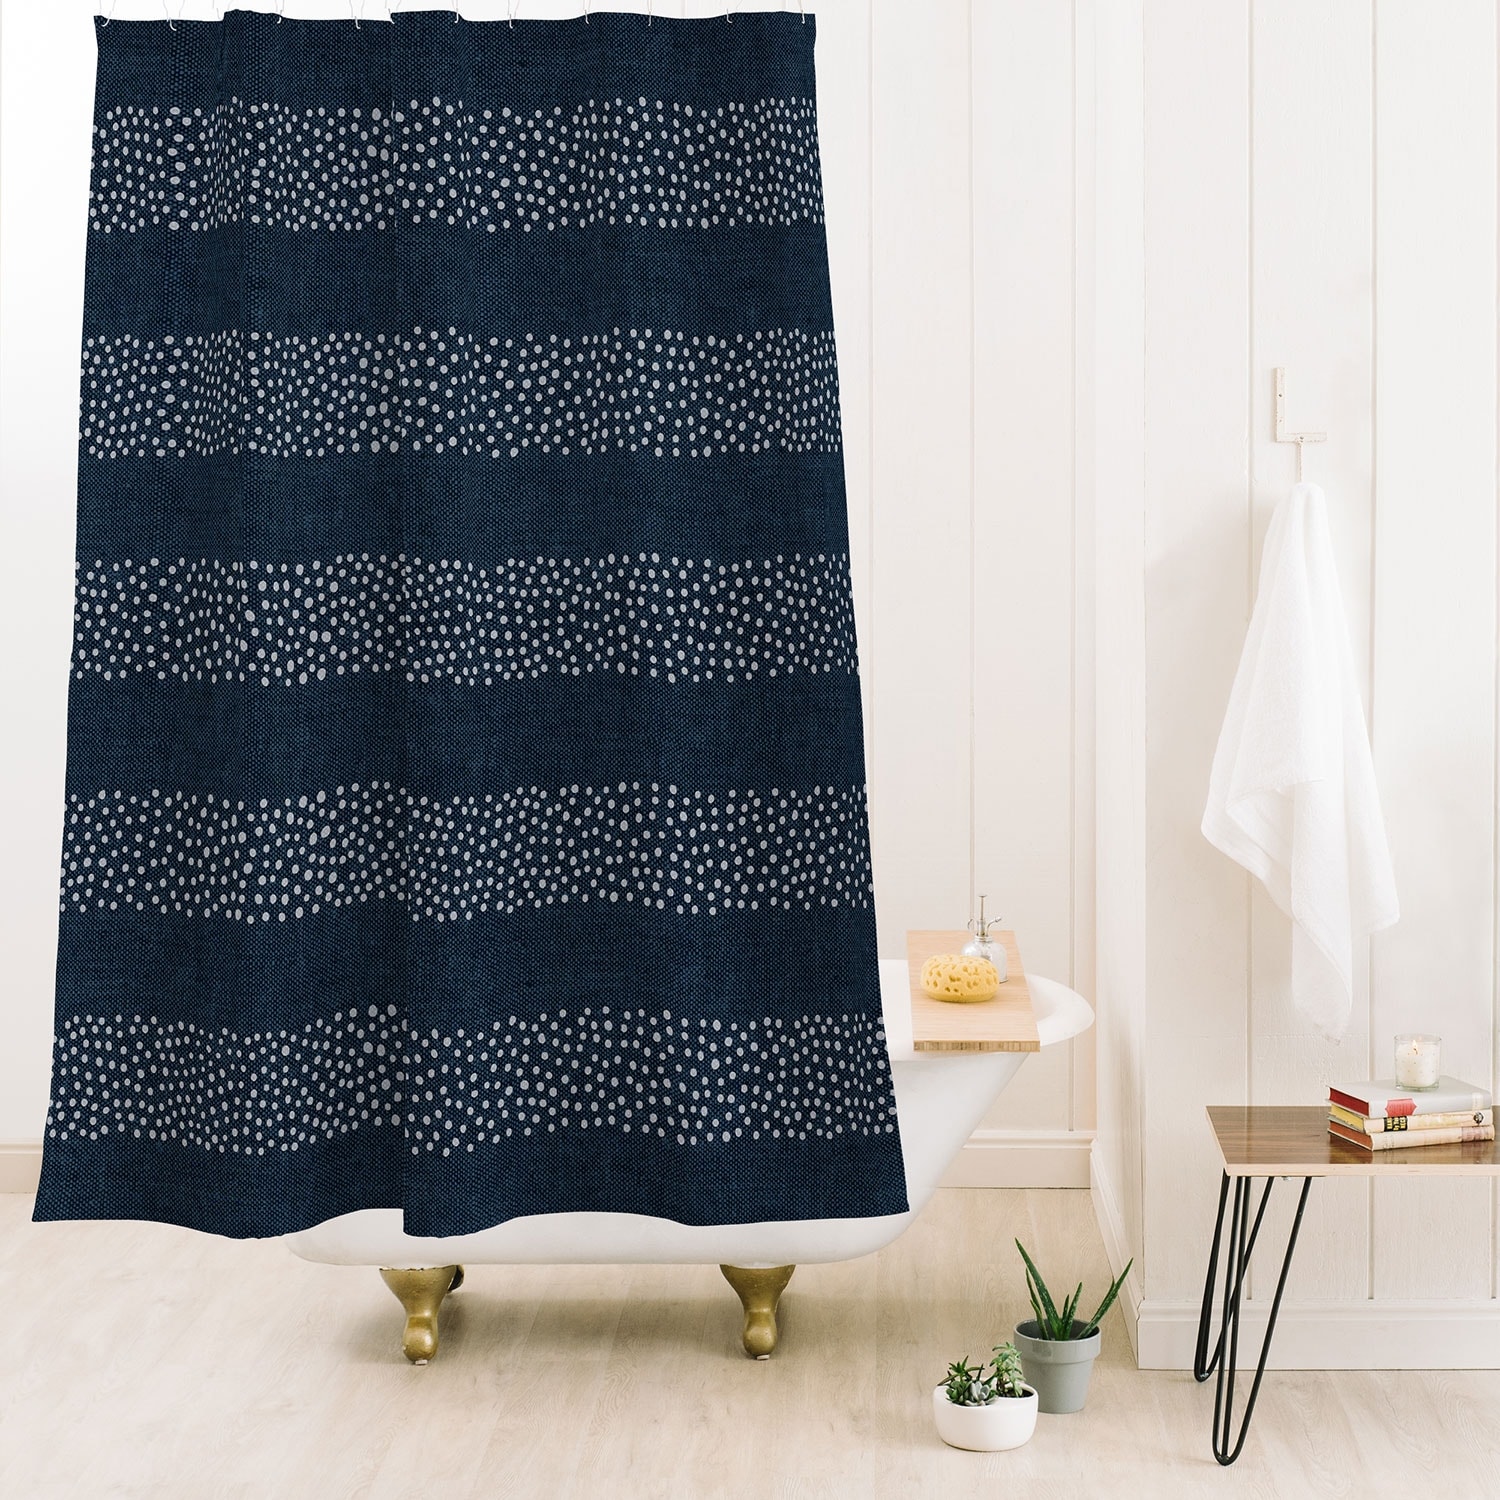 Little Arrow Design Co Angrand Stipple Stripes Navy Made to Order Shower Curtain 71" x 74" with Liner - 71" x 74"